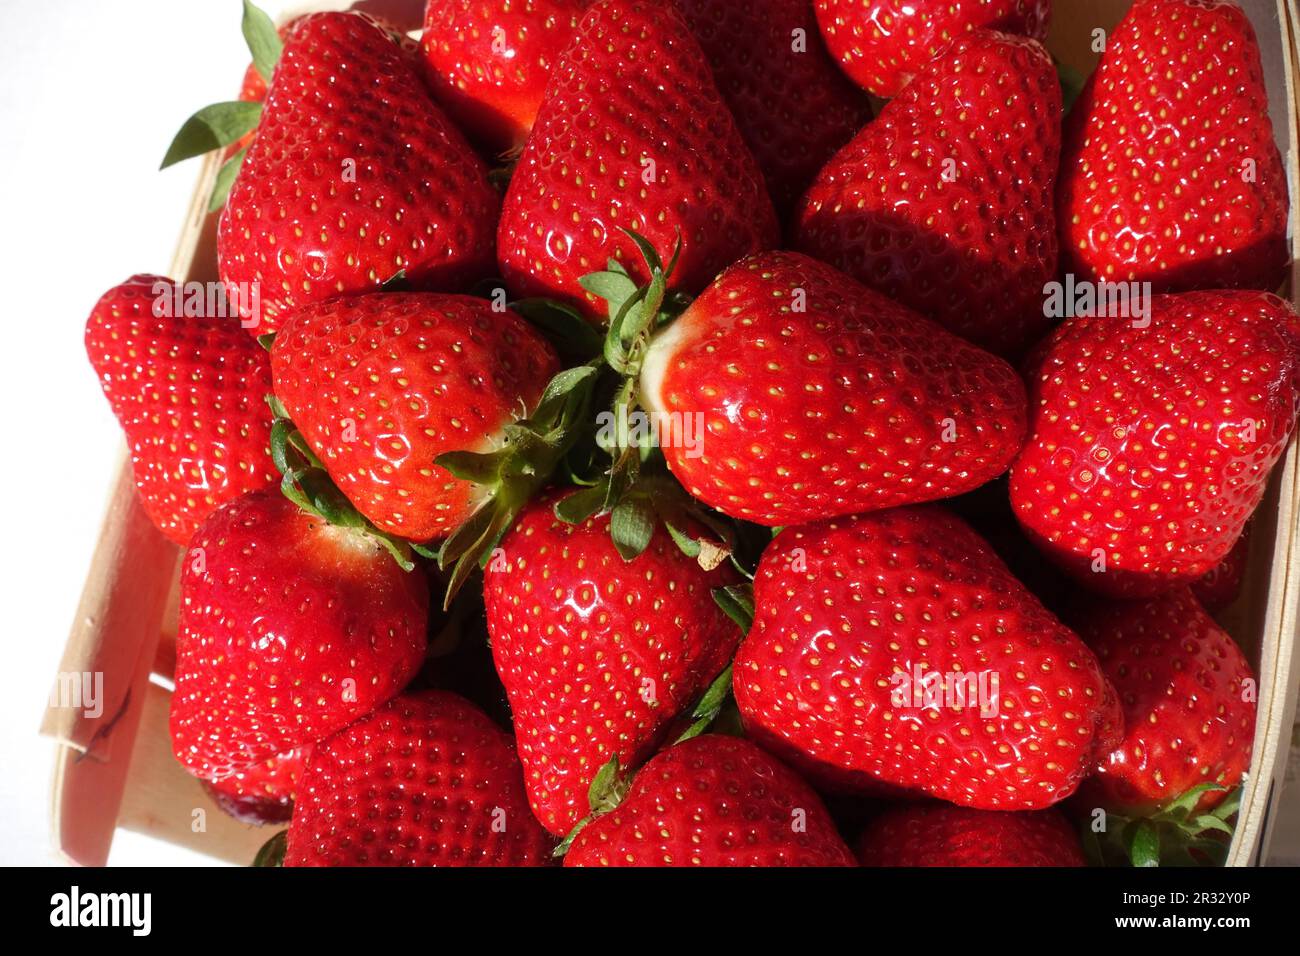 Red ripe strawberries in a basket at a farmers market in France Stock Photo